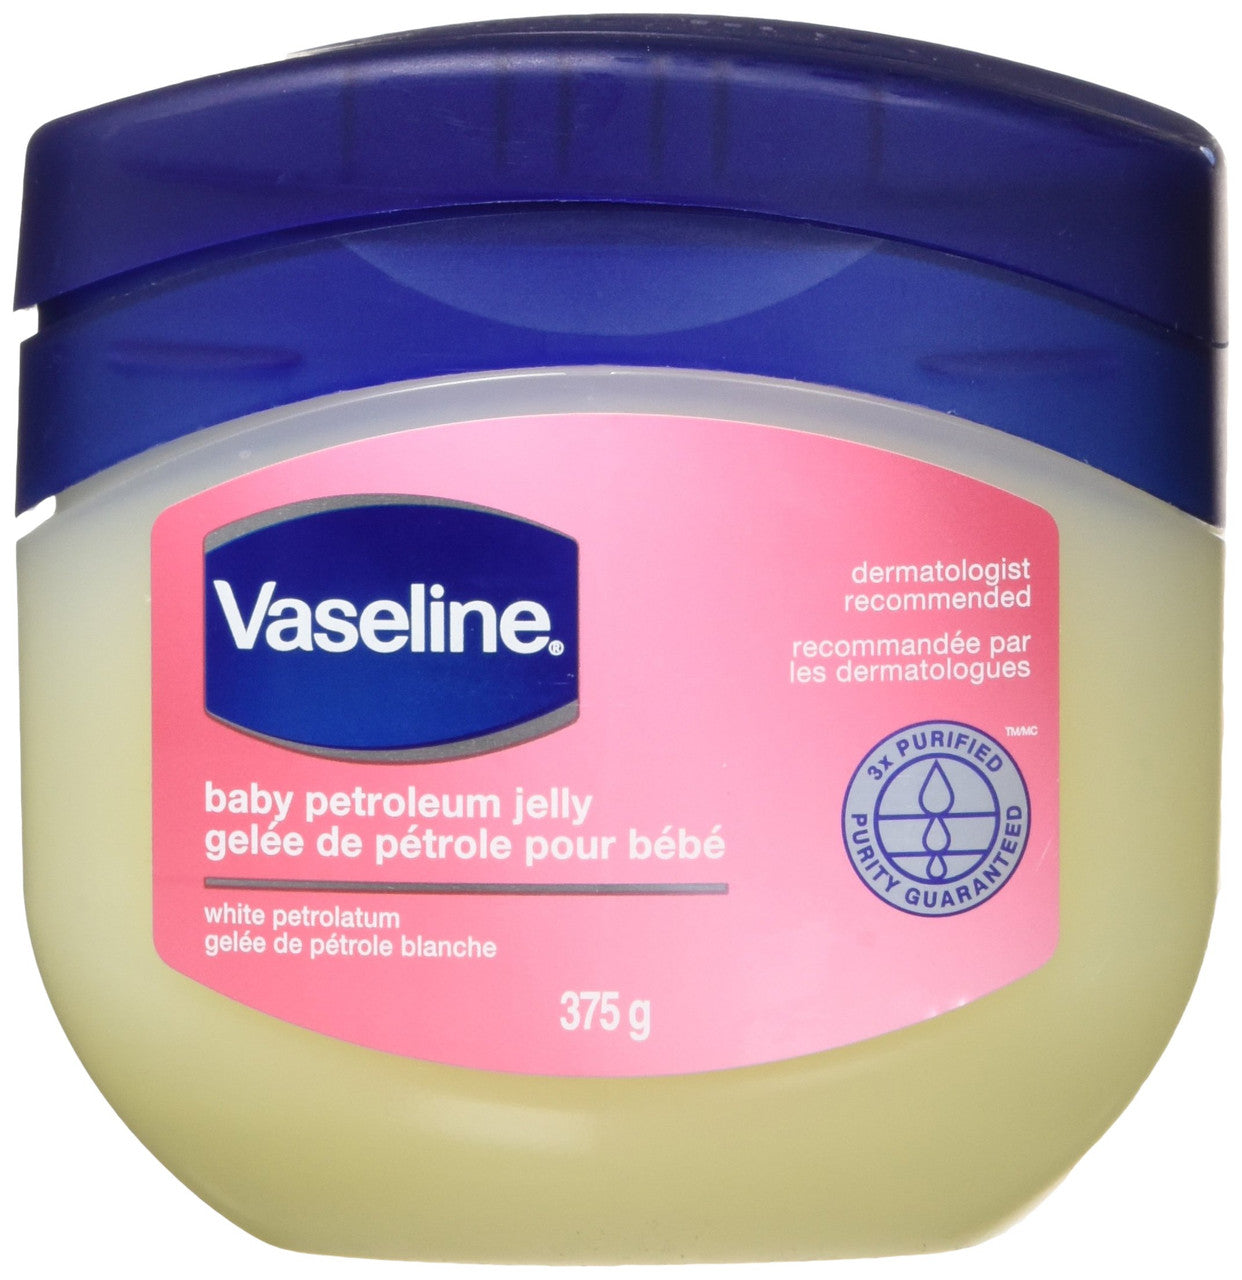 Vaseline Baby Petroleum Jelly 375g/13.2oz., {Imported from Canada}